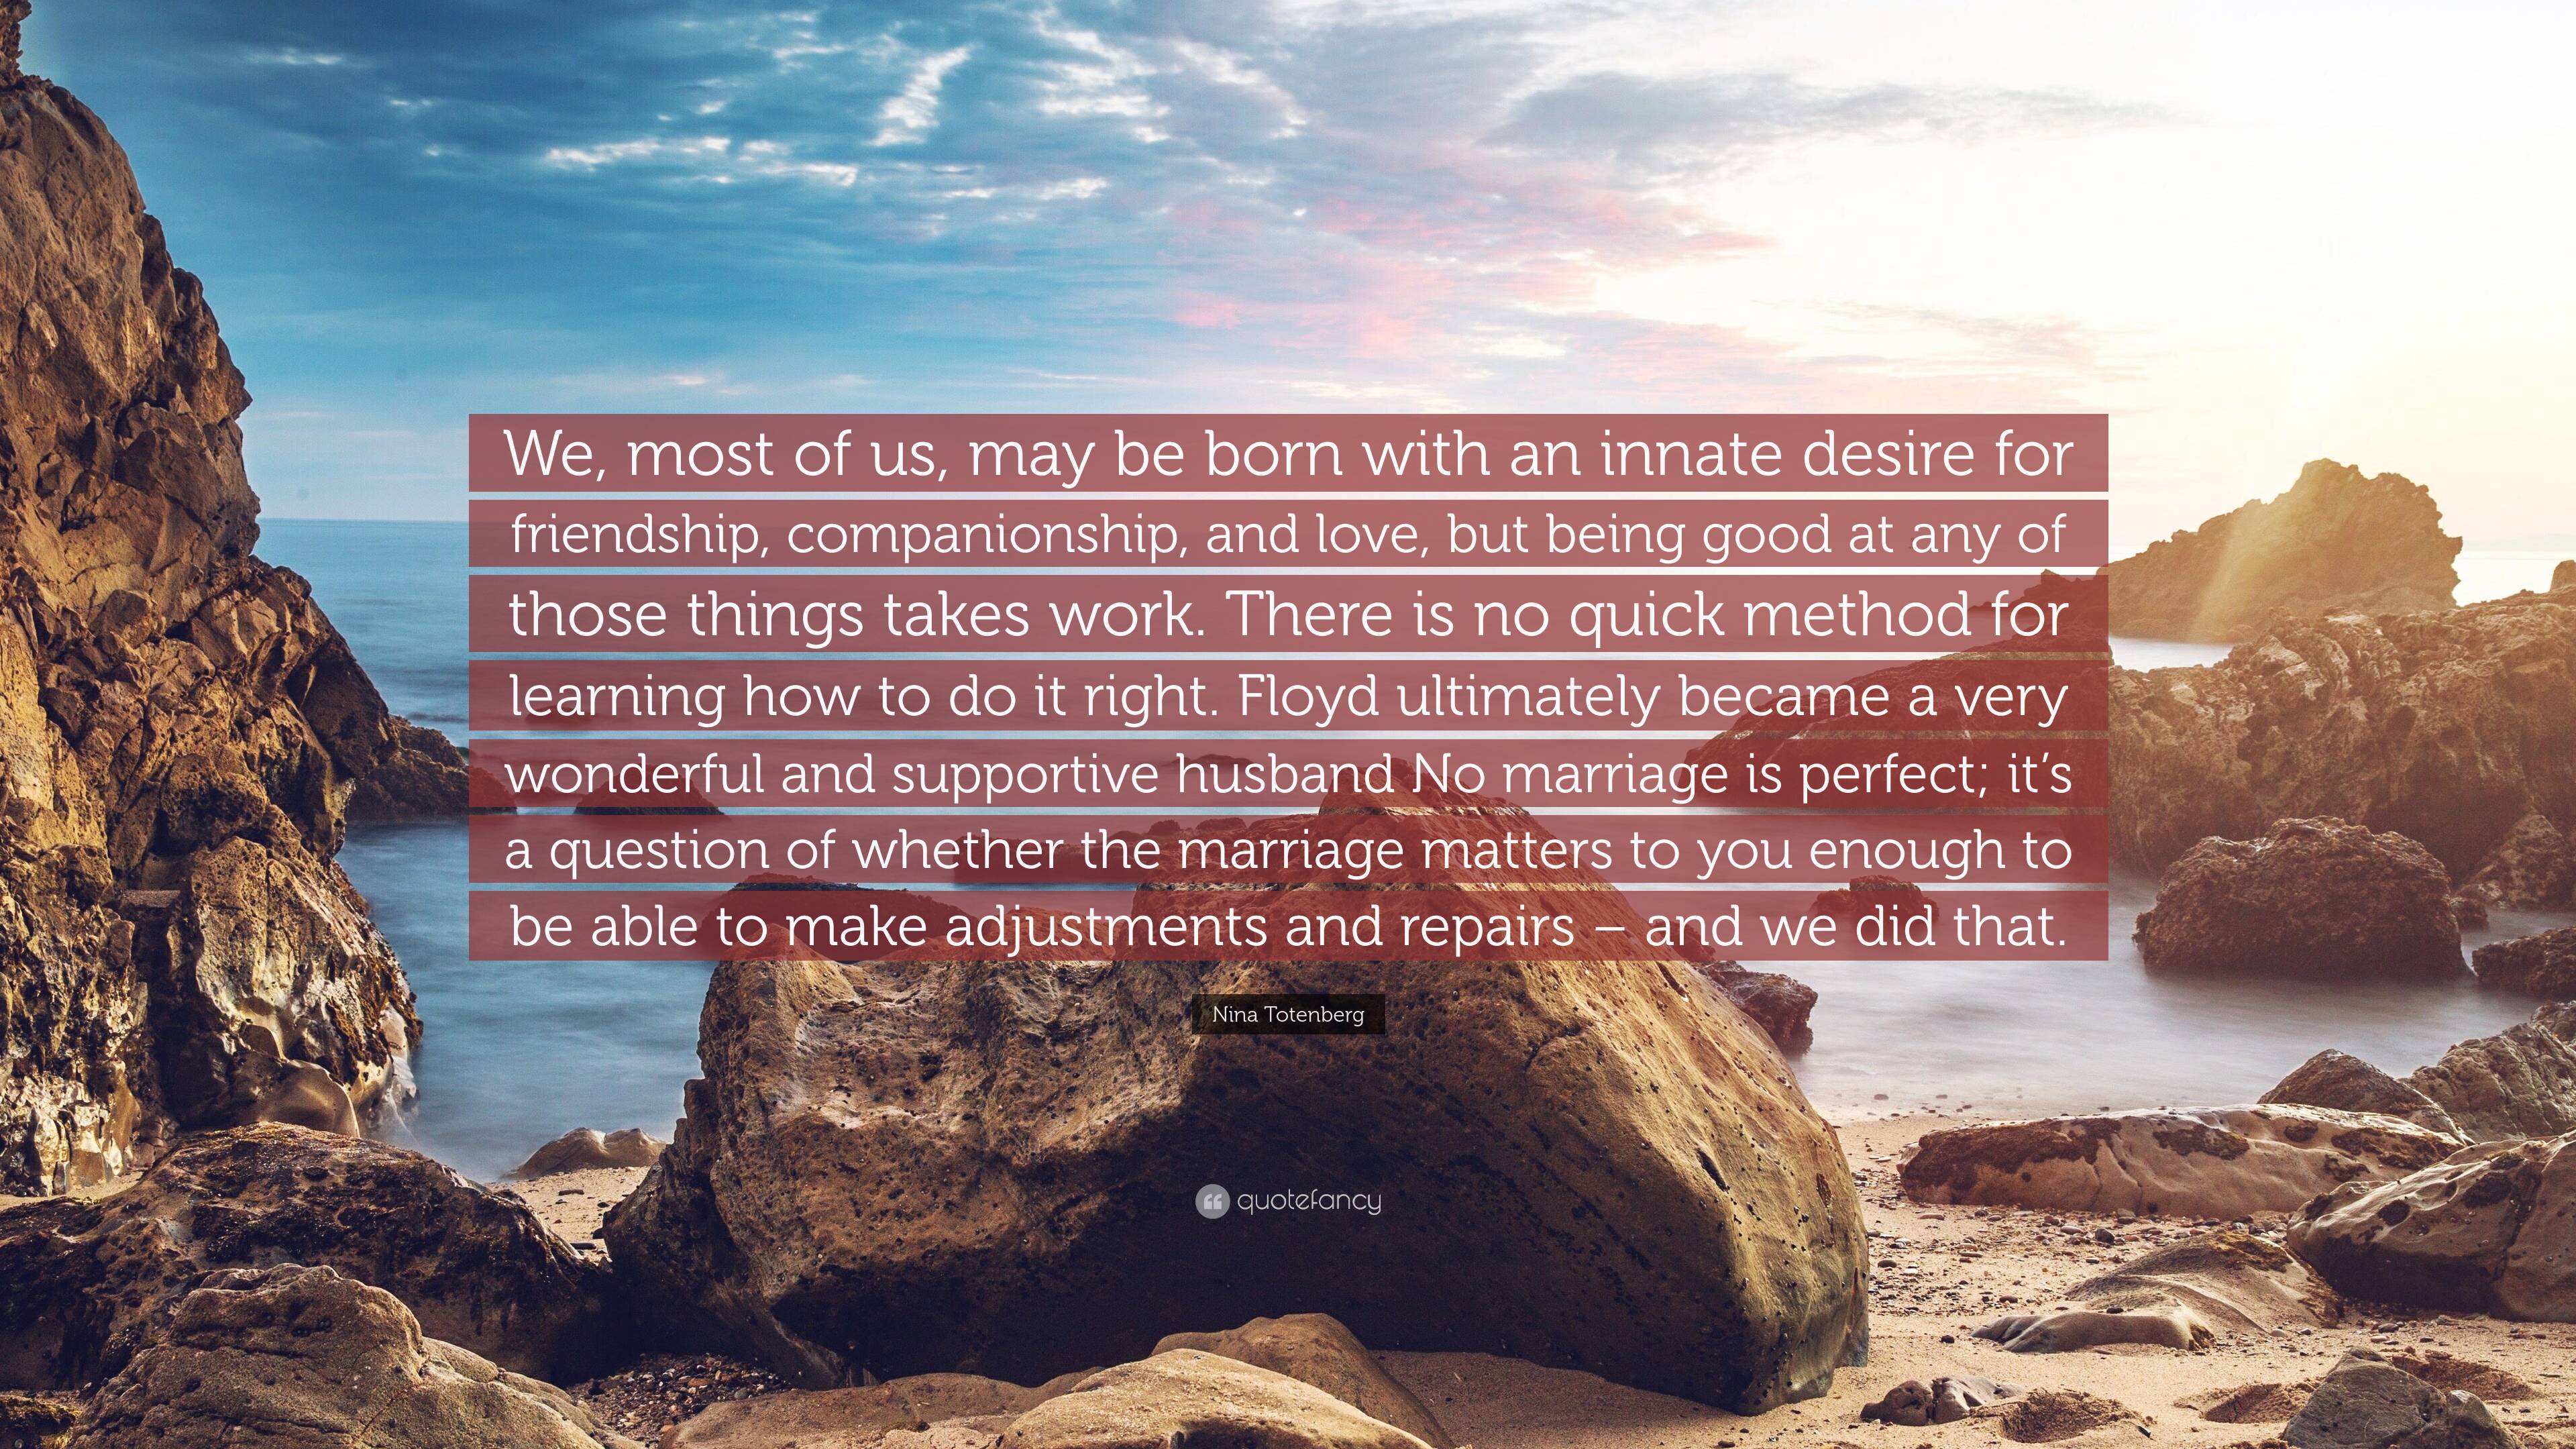 Nina Totenberg Quote: “We, most of us, may be born with an innate ...